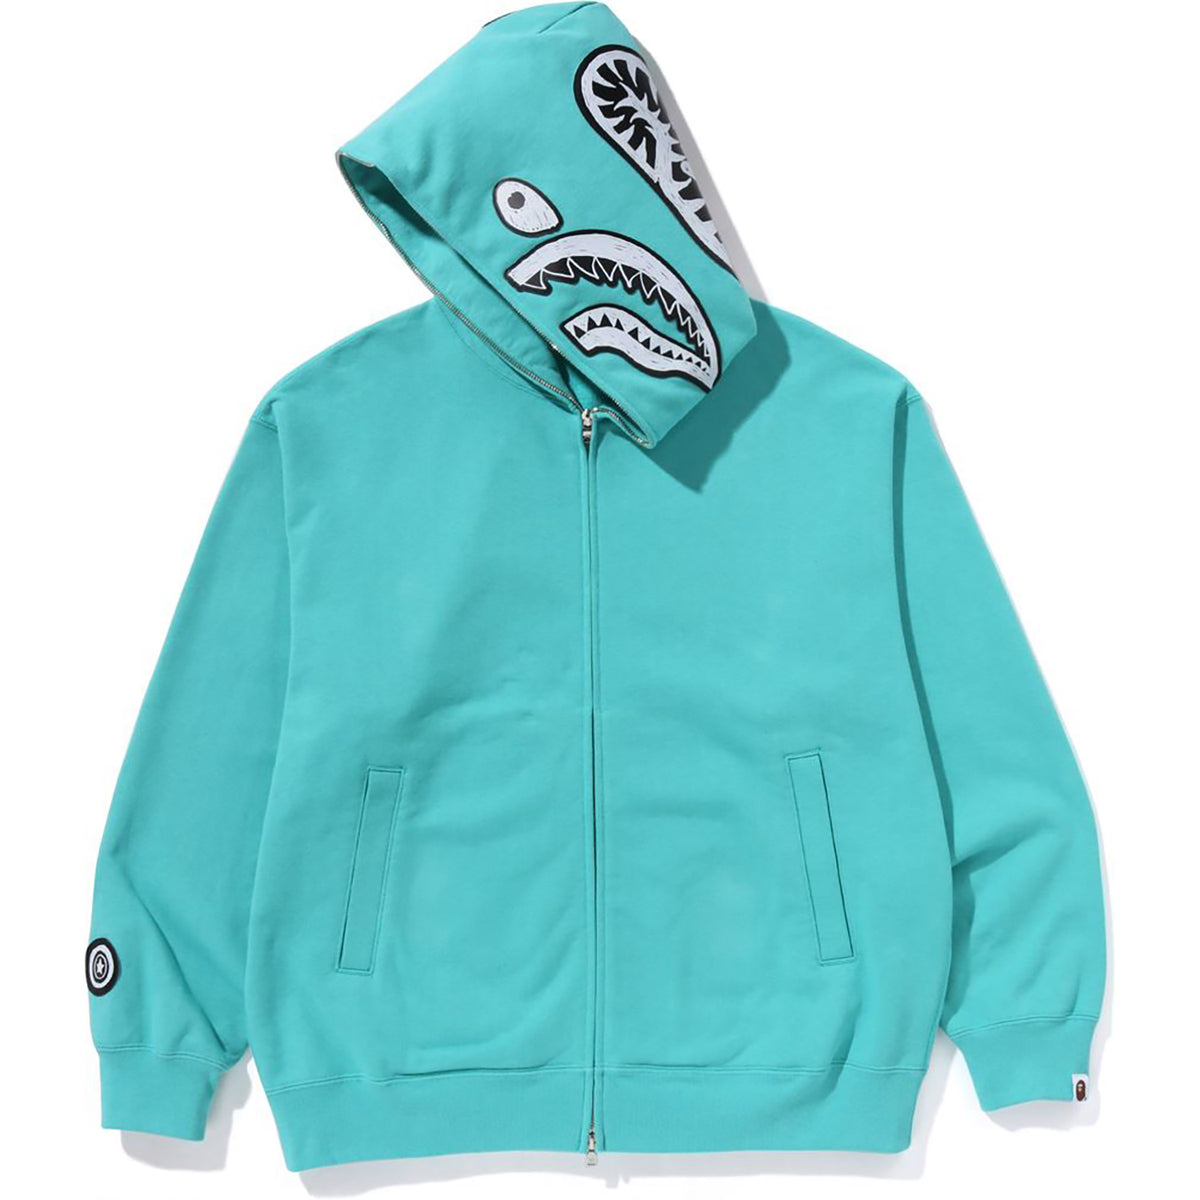 HAND DRAWN FACE RELAXED FIT SHARK FULL ZIP HOODIE MENS